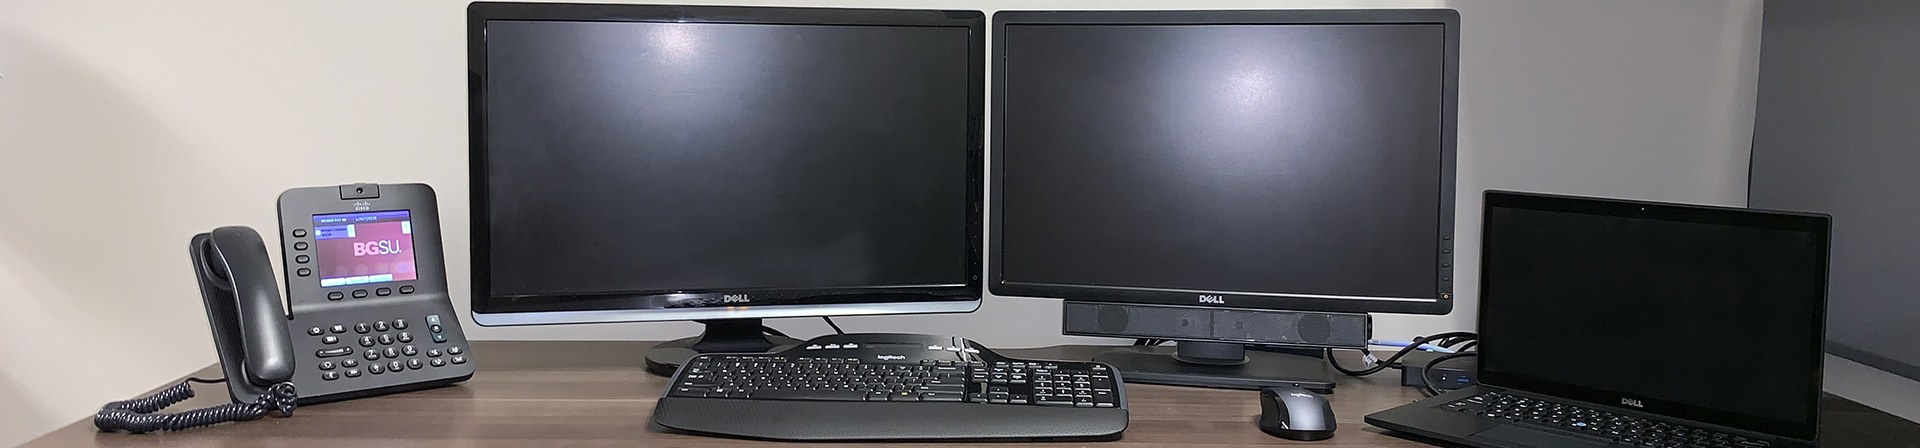 desk setup with university phone, two monitors a dell laptop and a wireless keyboard and mouse